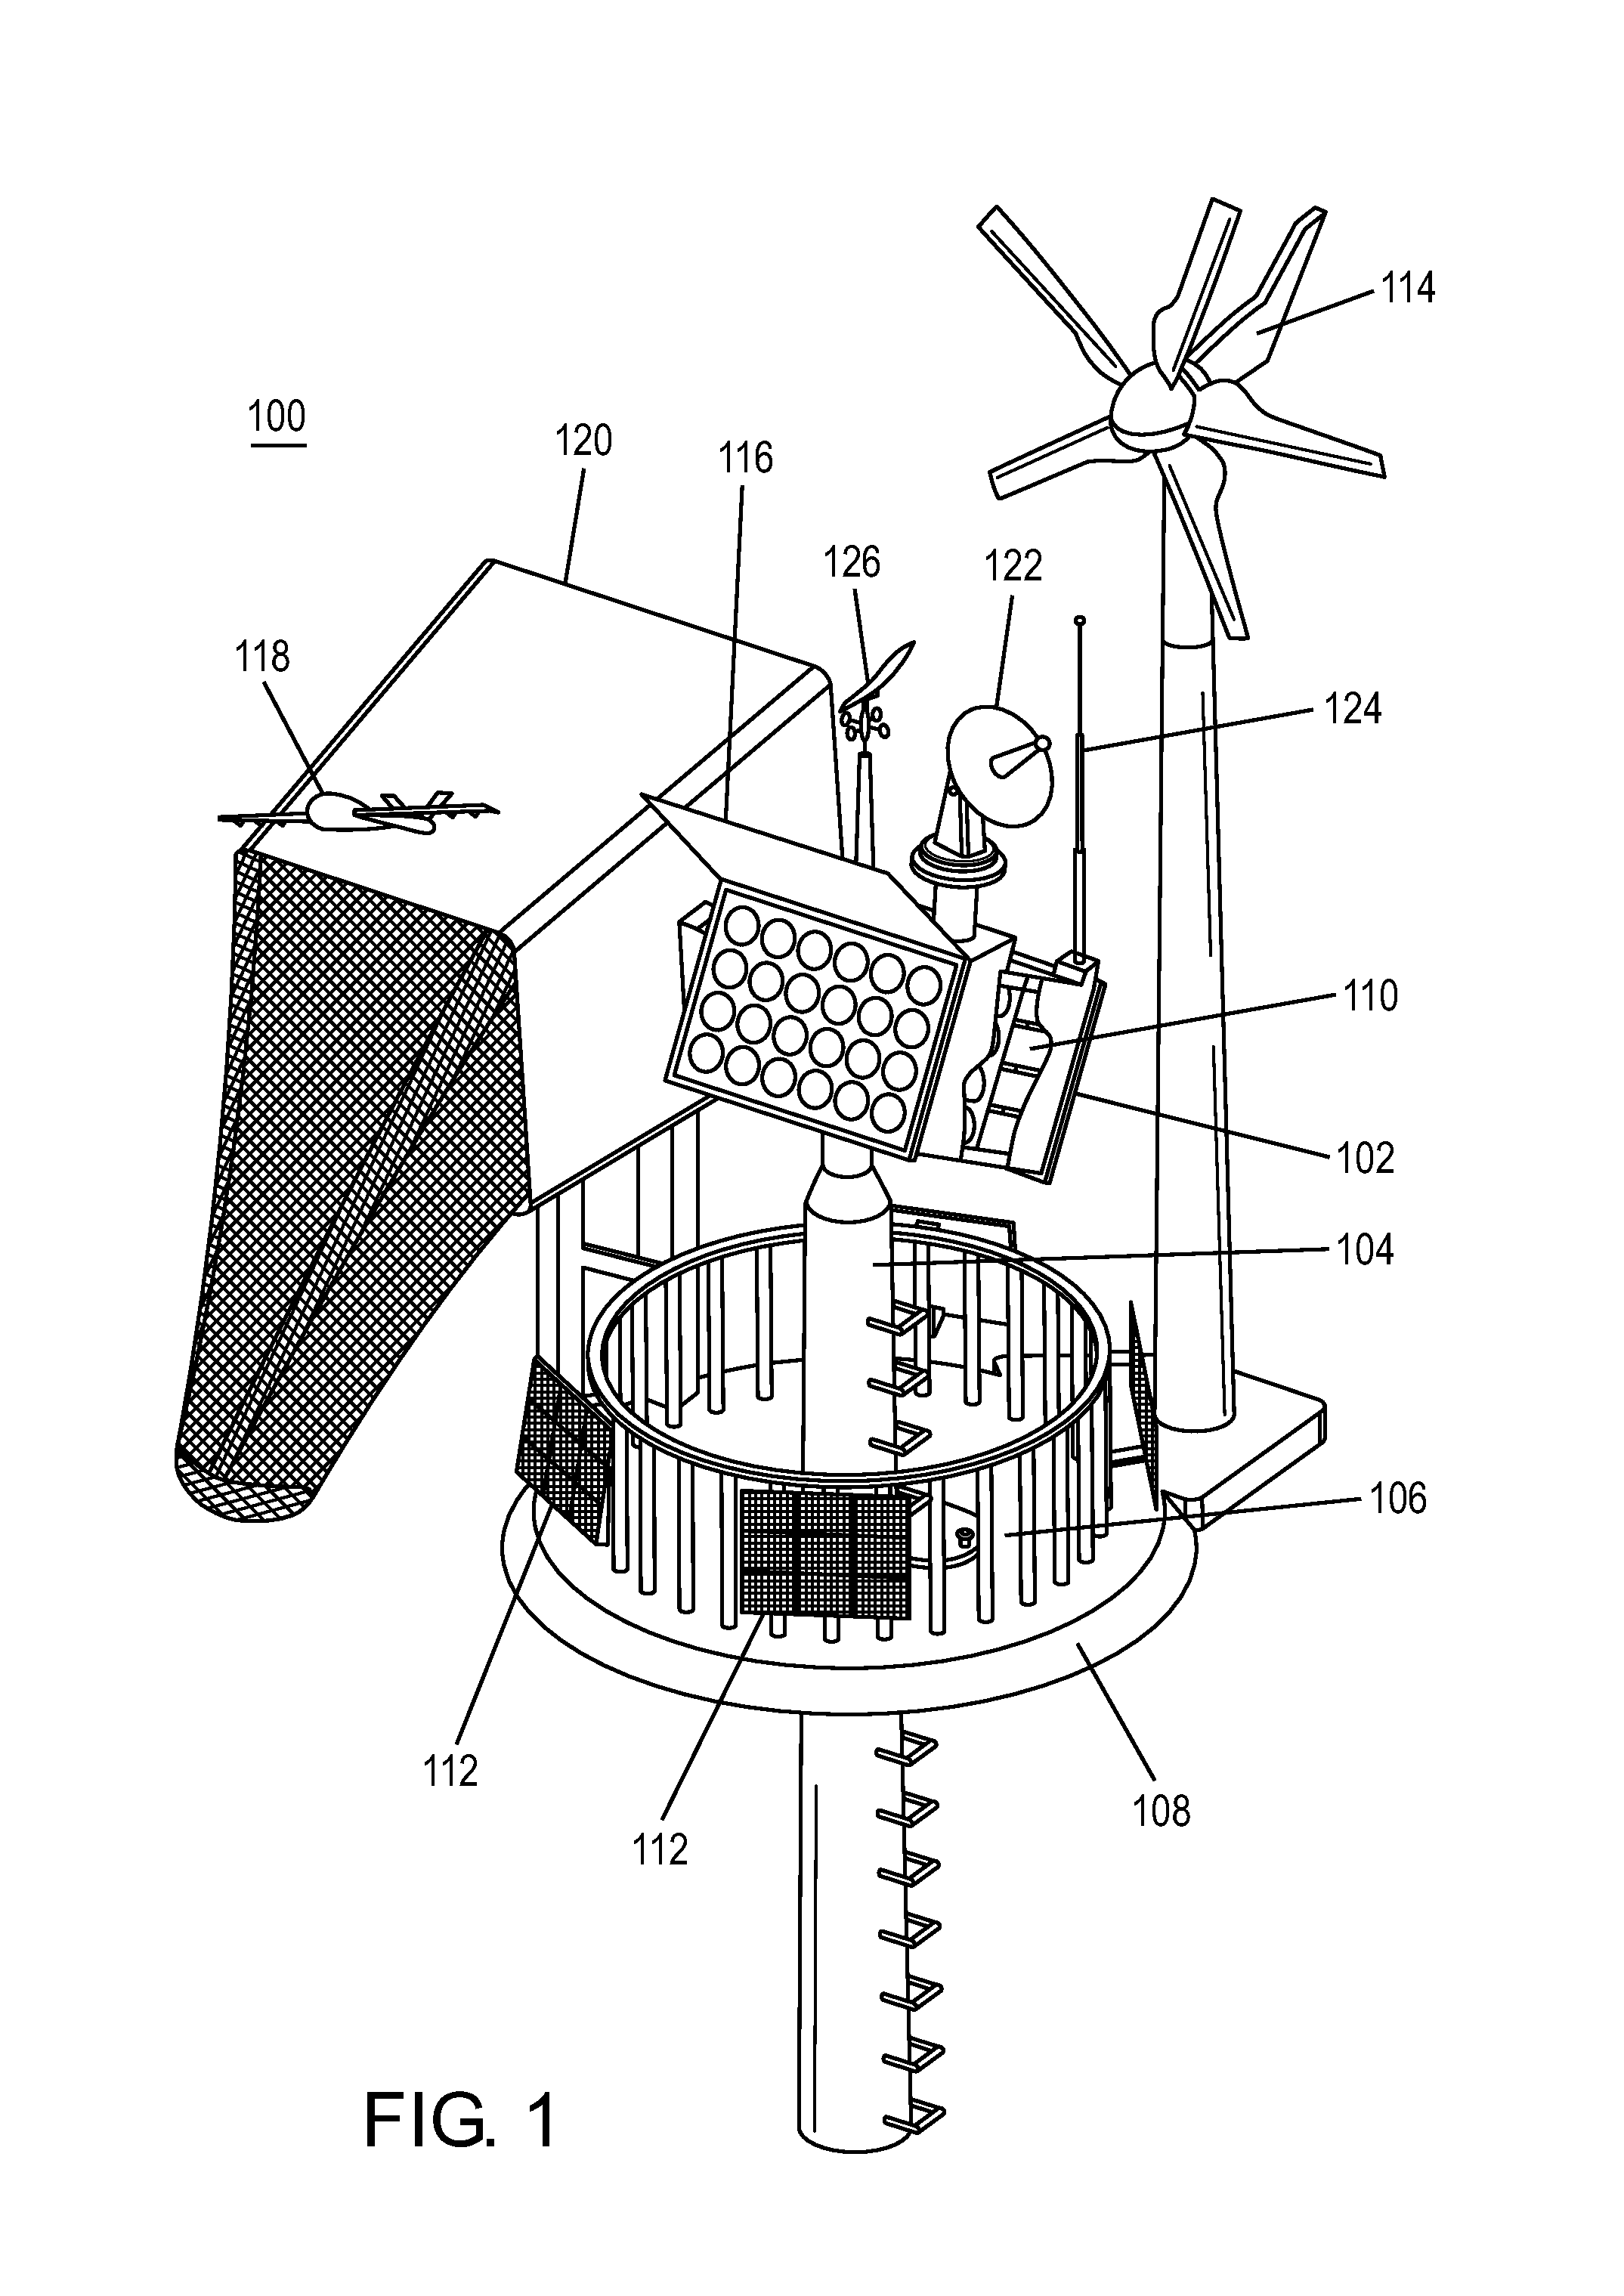 Systems and methods for deployment and operation of unmanned aerial vehicles